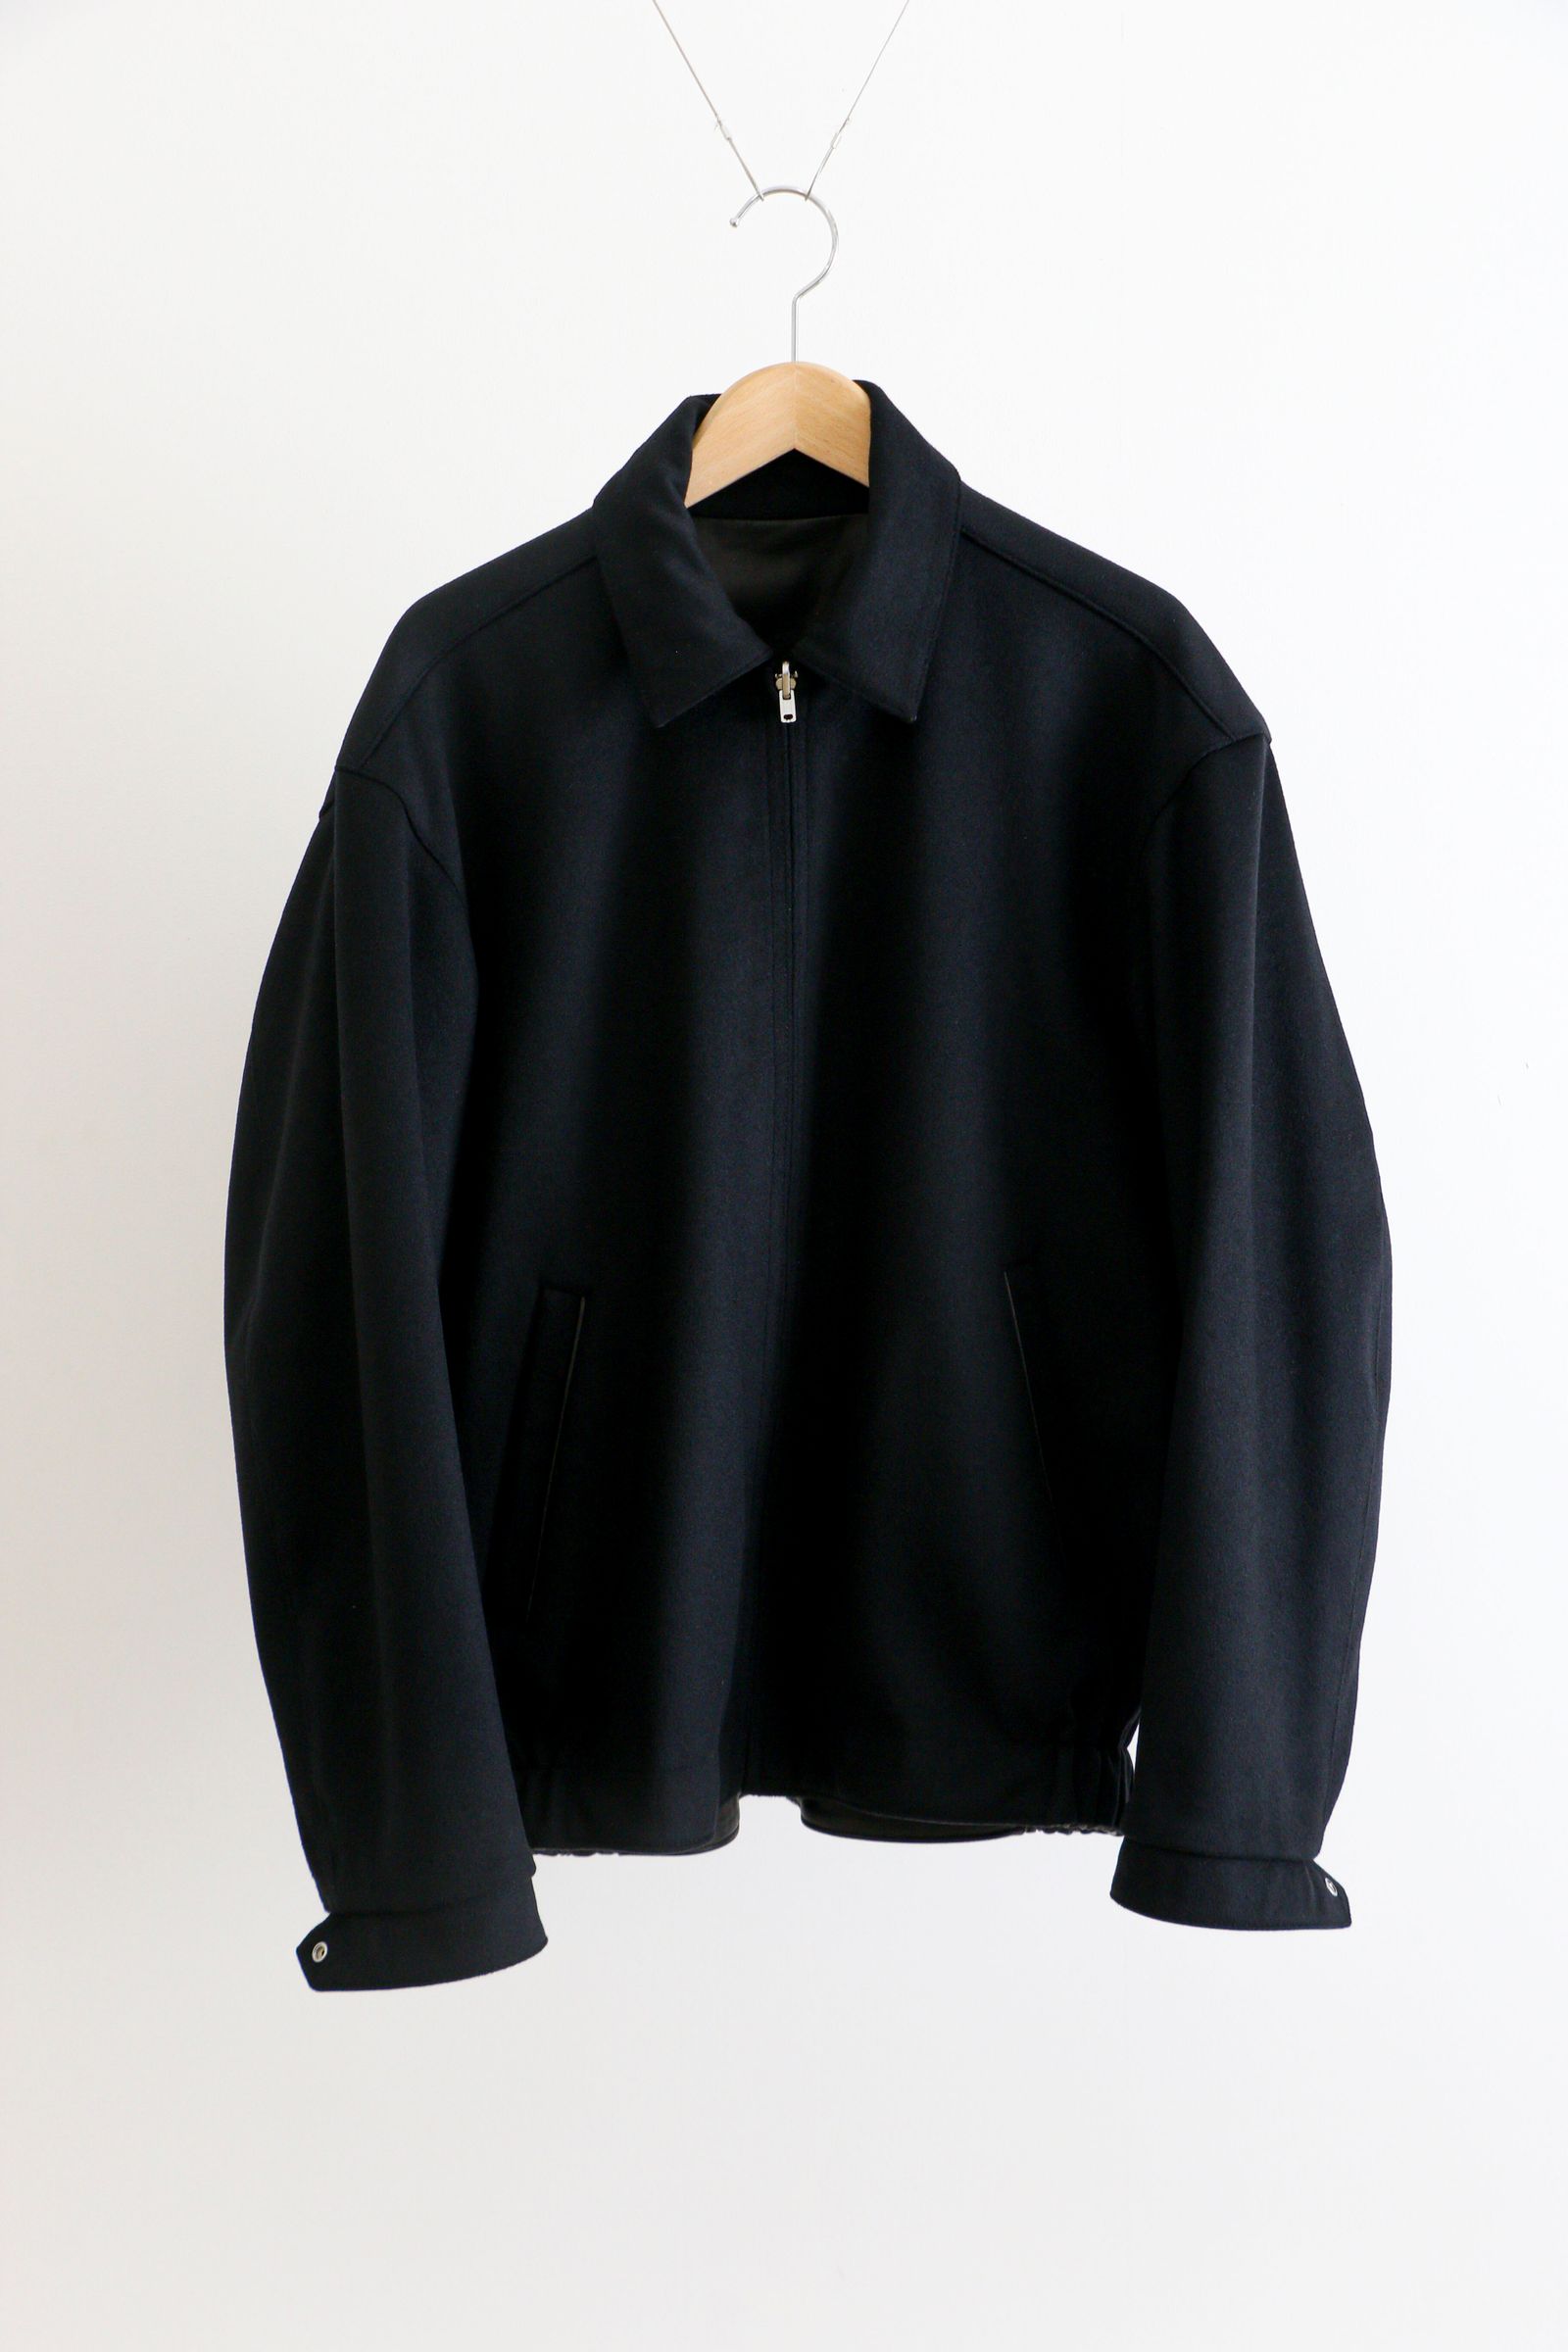 SEVEN BY SEVEN - REVERSIBLE LEATHER BLOUSON BLACK - Sheep leather